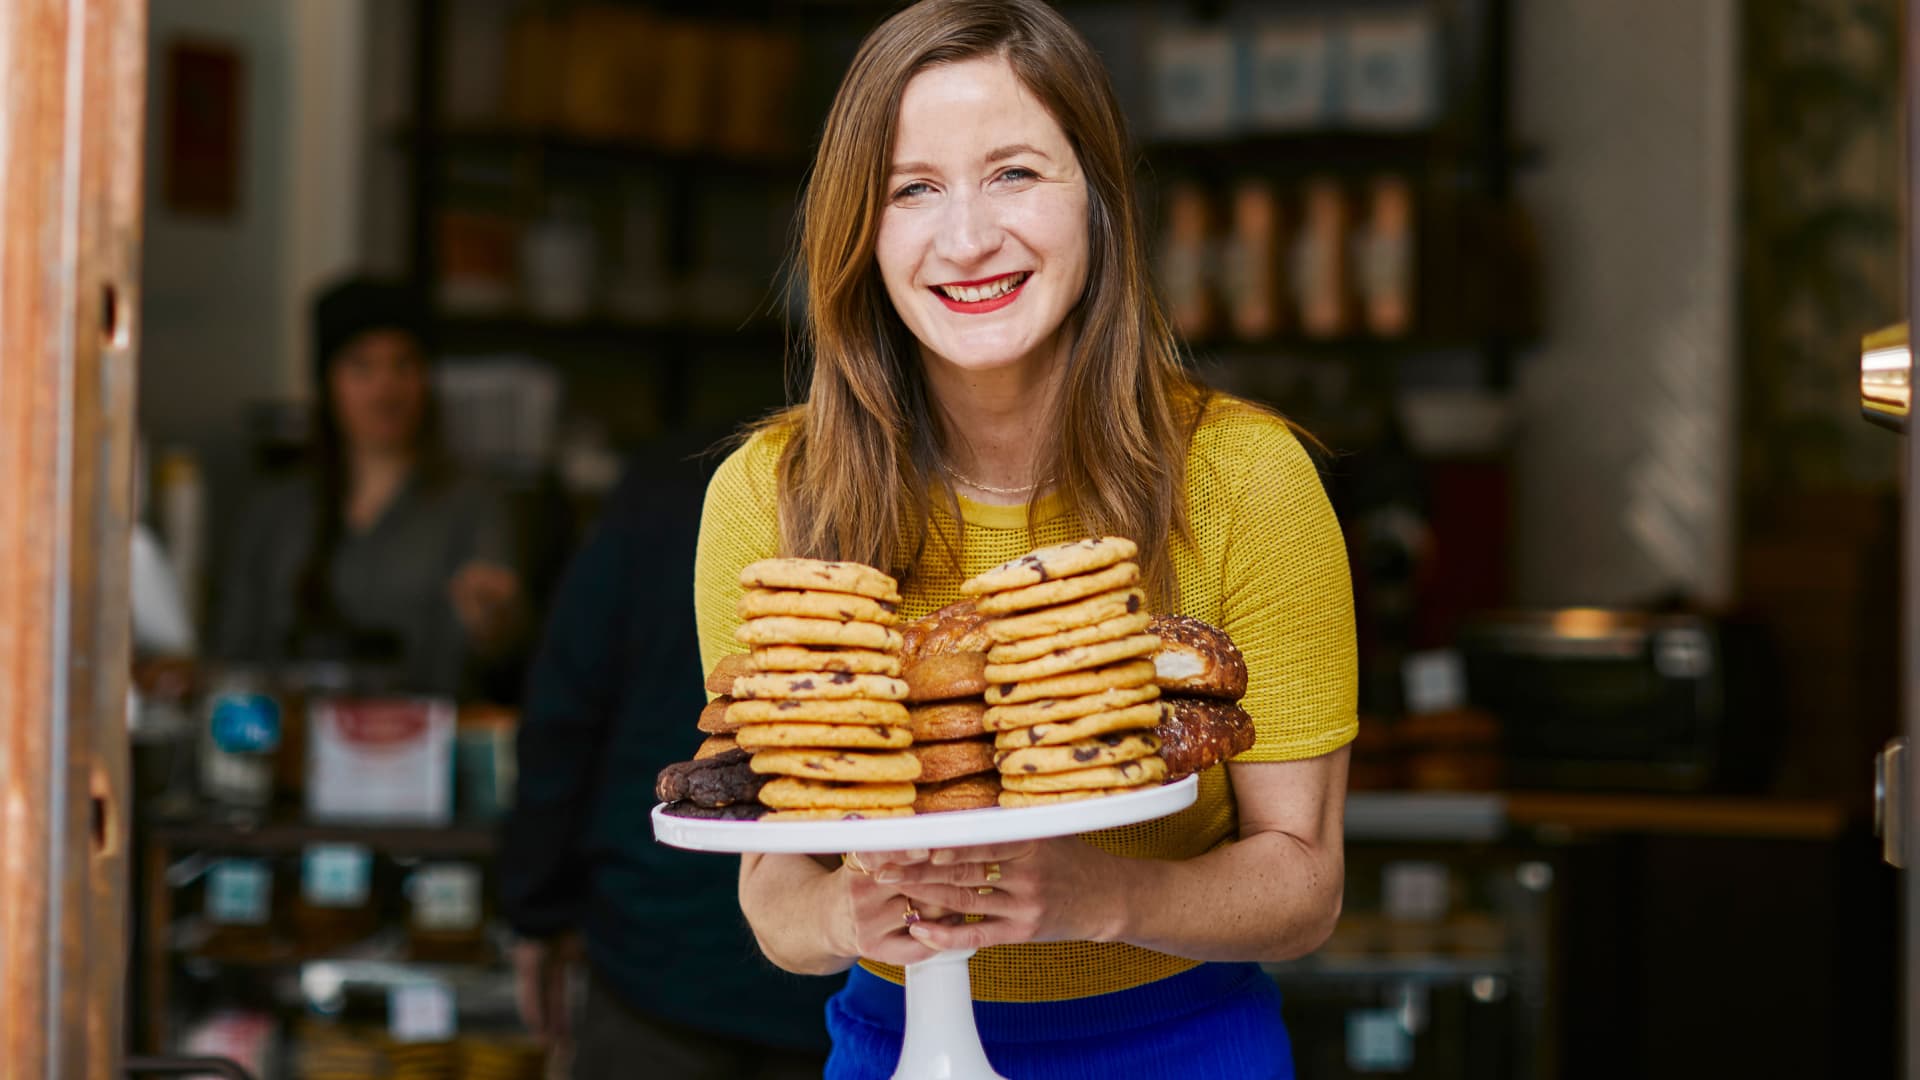 Agatha Kulaga, co-founder and CEO of Ovenly